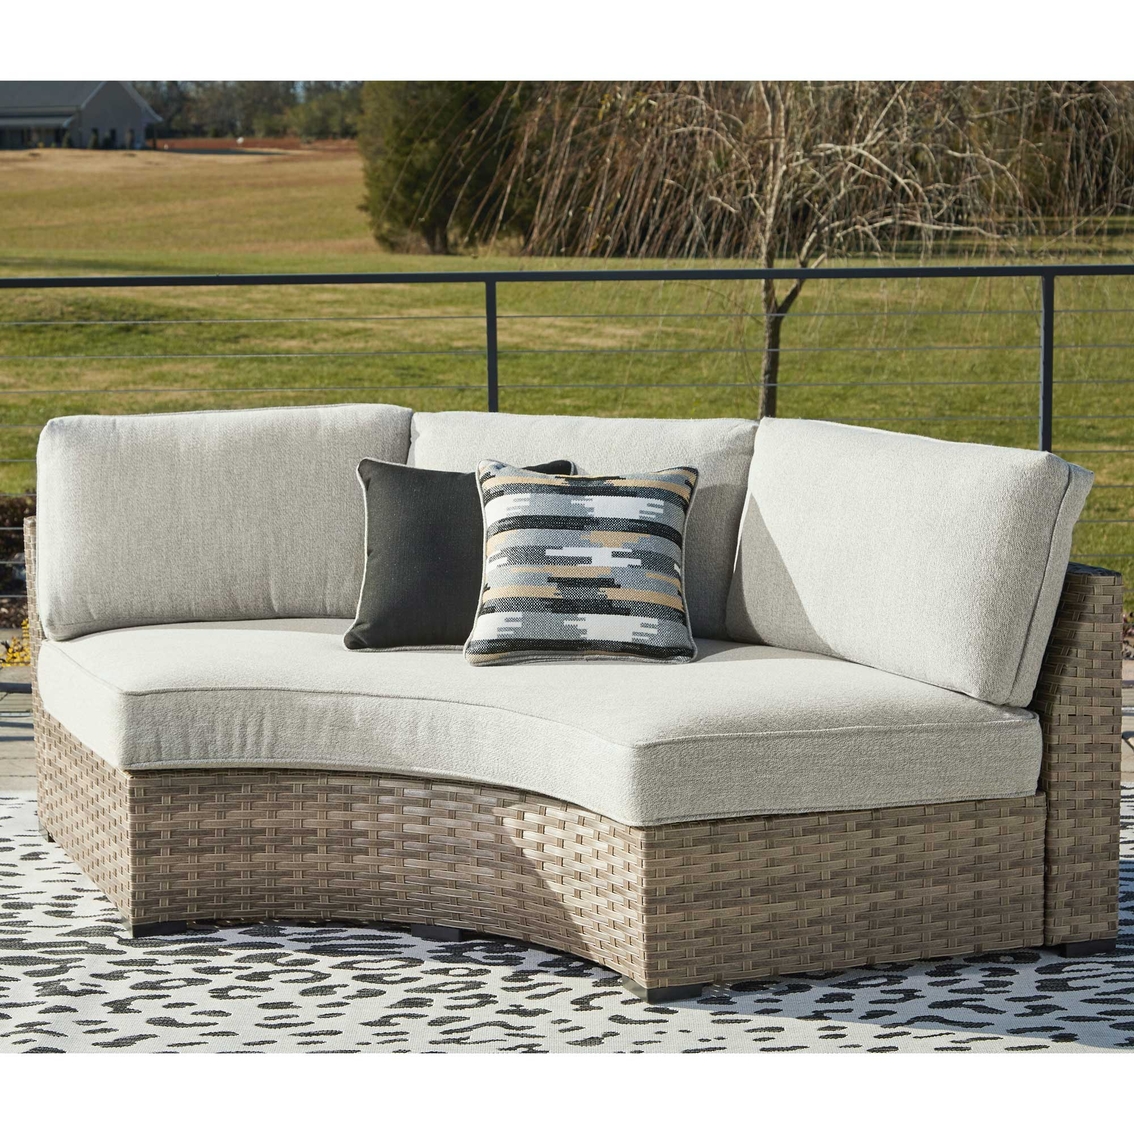 Signature Design by Ashley Calworth Outdoor 10 pc. Set with Firepit Table - Image 2 of 10